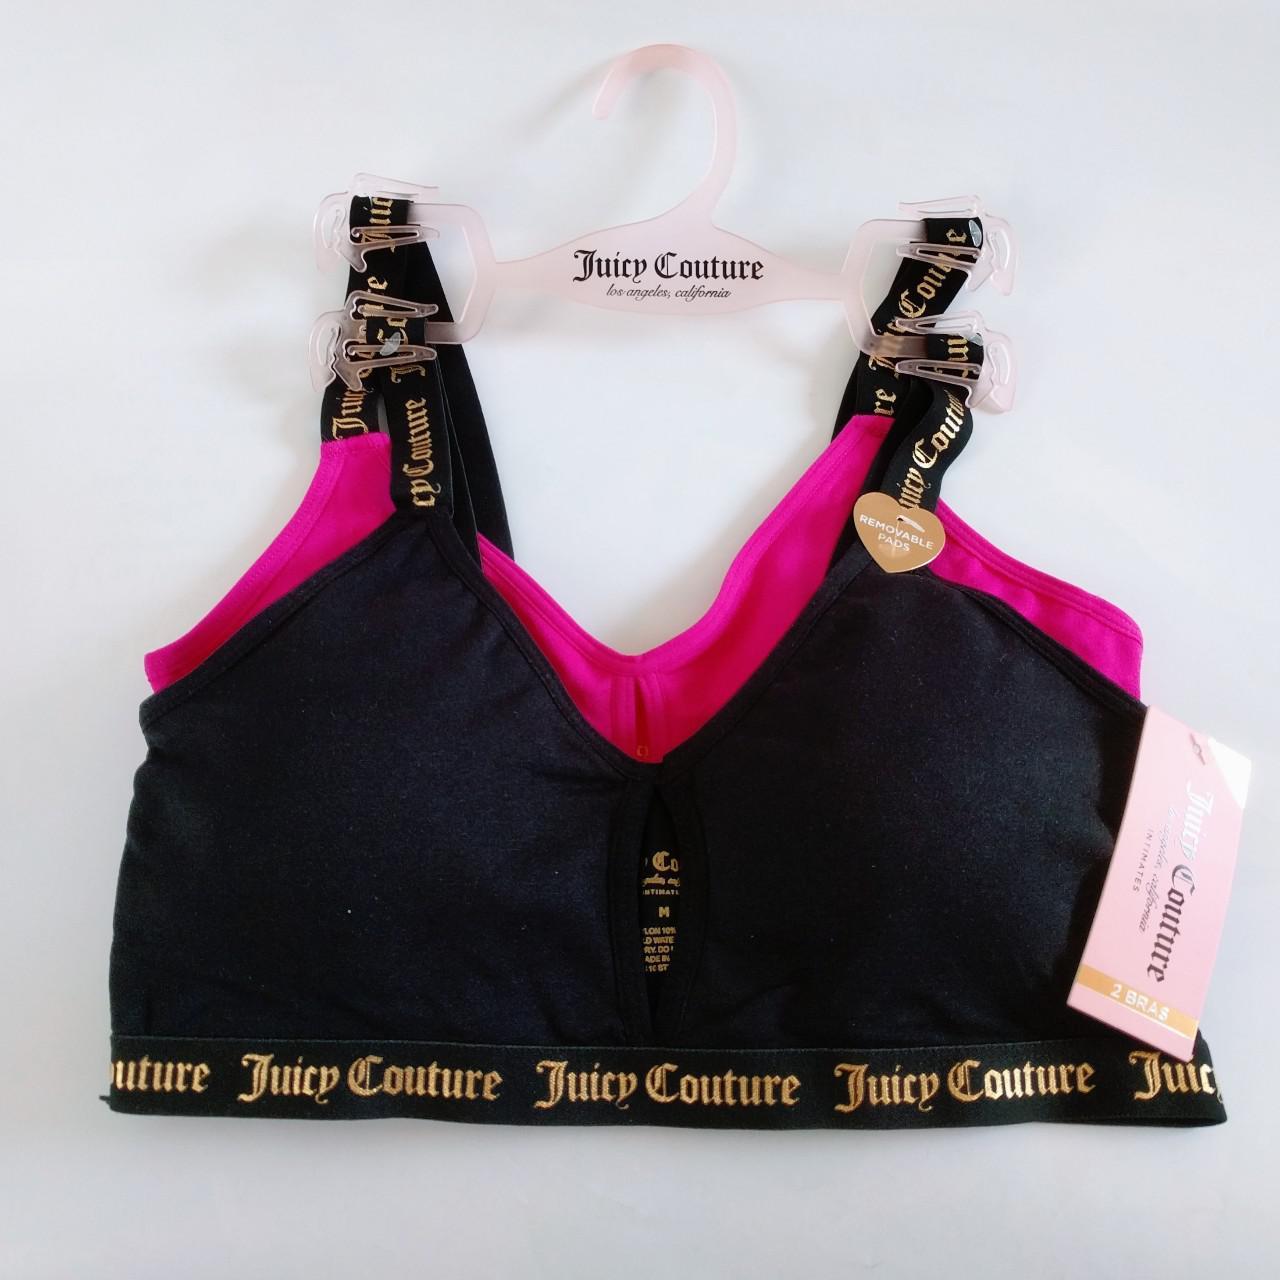 Juicy Couture, Intimates & Sleepwear, Nwt Juicy Couture 2pck Sport Bras